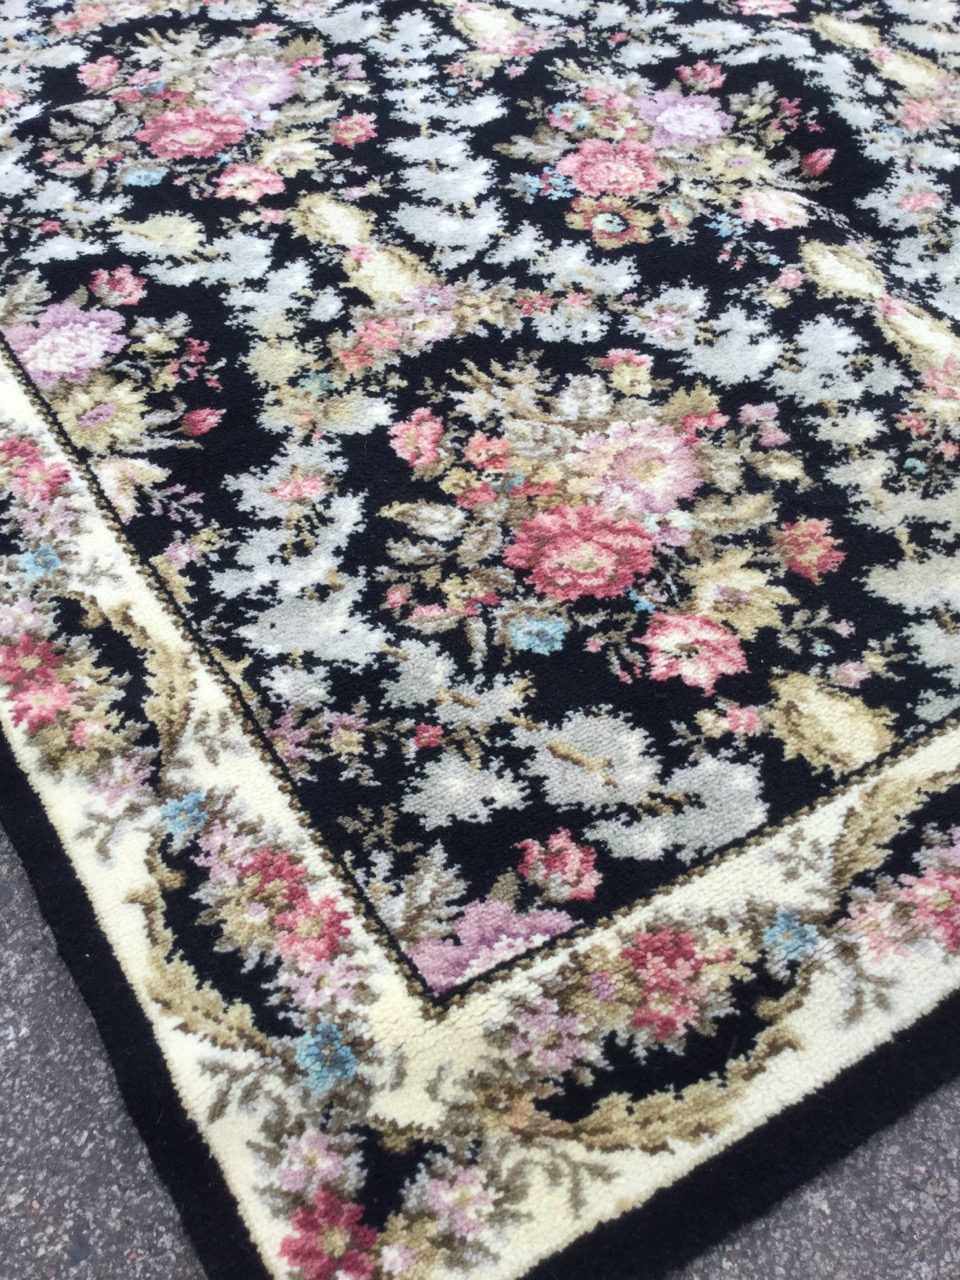 A Spanish Whitney wool rug woven in the Escorial pattern with field of flowers on black ground - Image 3 of 3